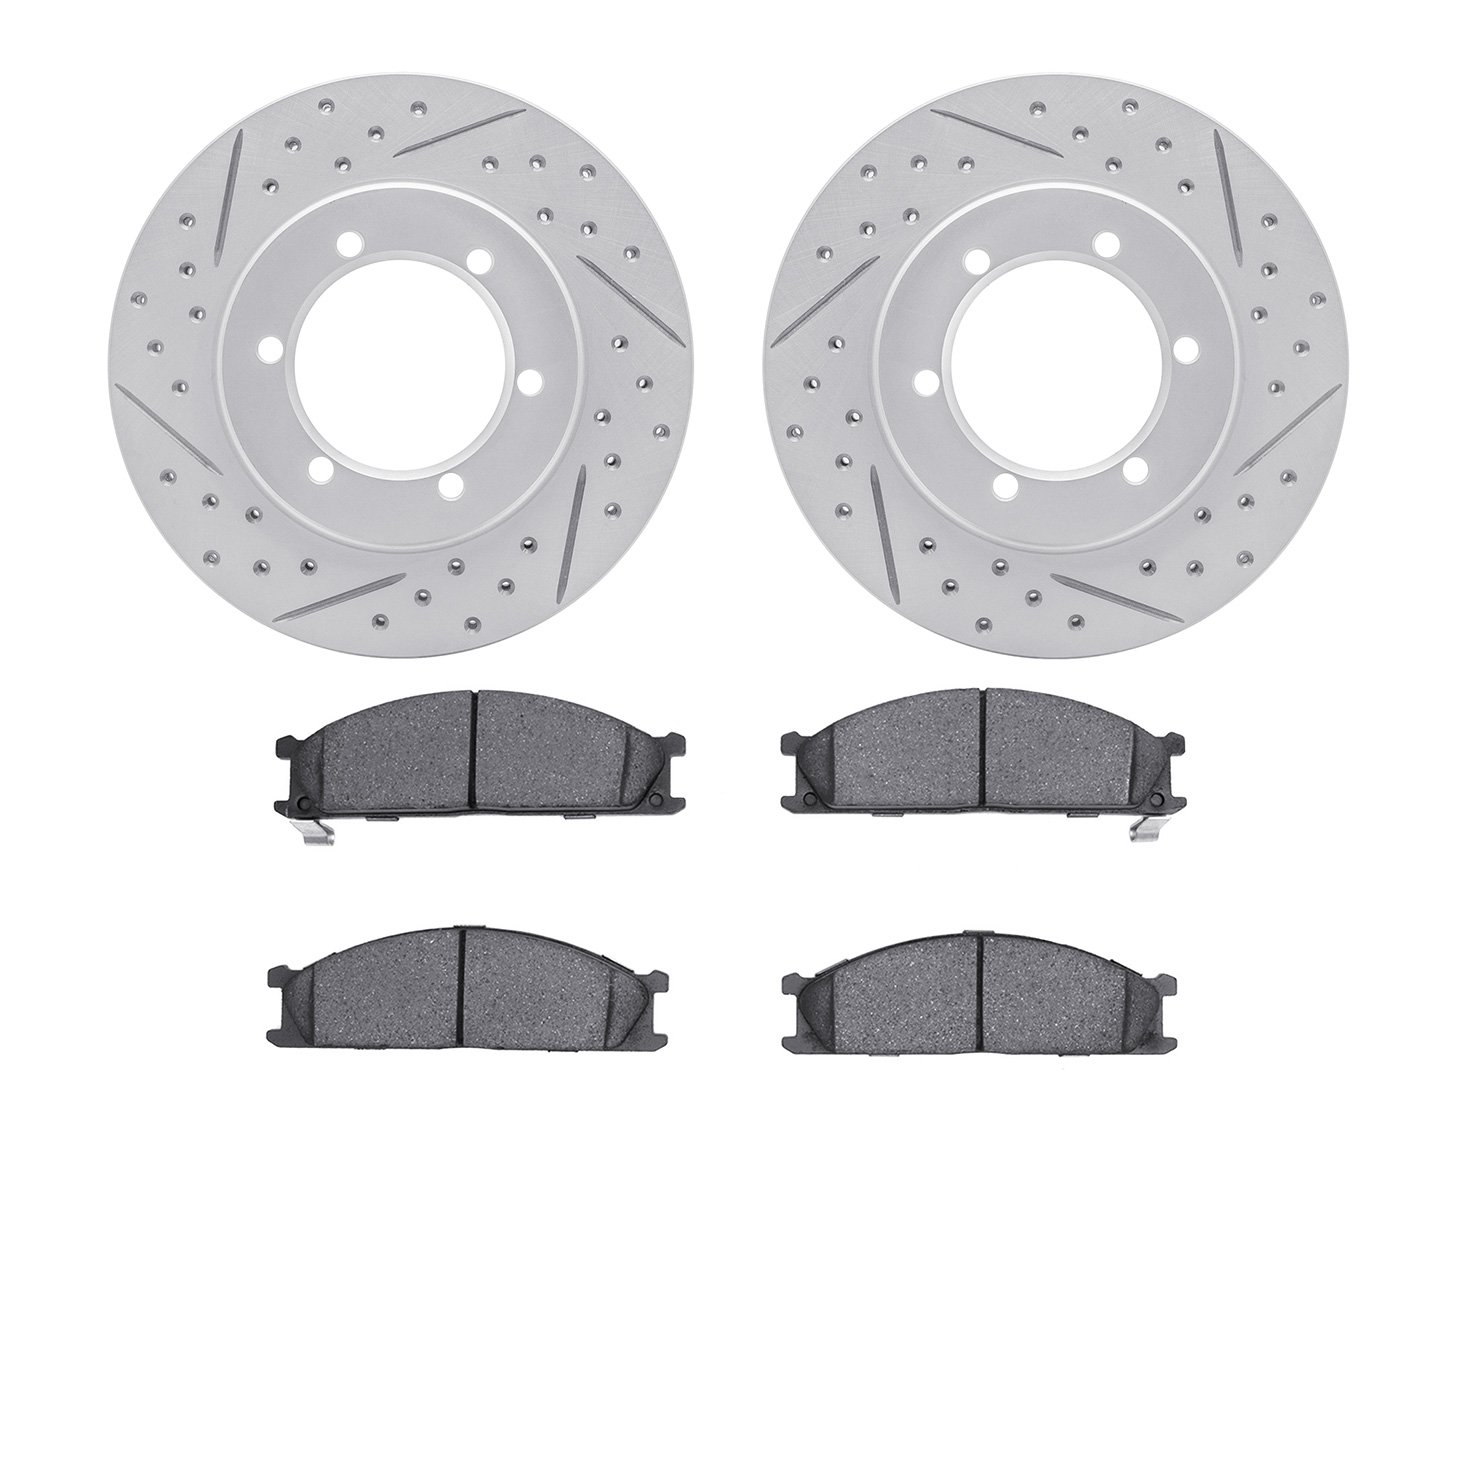 2502-67045 Geoperformance Drilled/Slotted Rotors w/5000 Advanced Brake Pads Kit, 1998-2015 Infiniti/Nissan, Position: Front